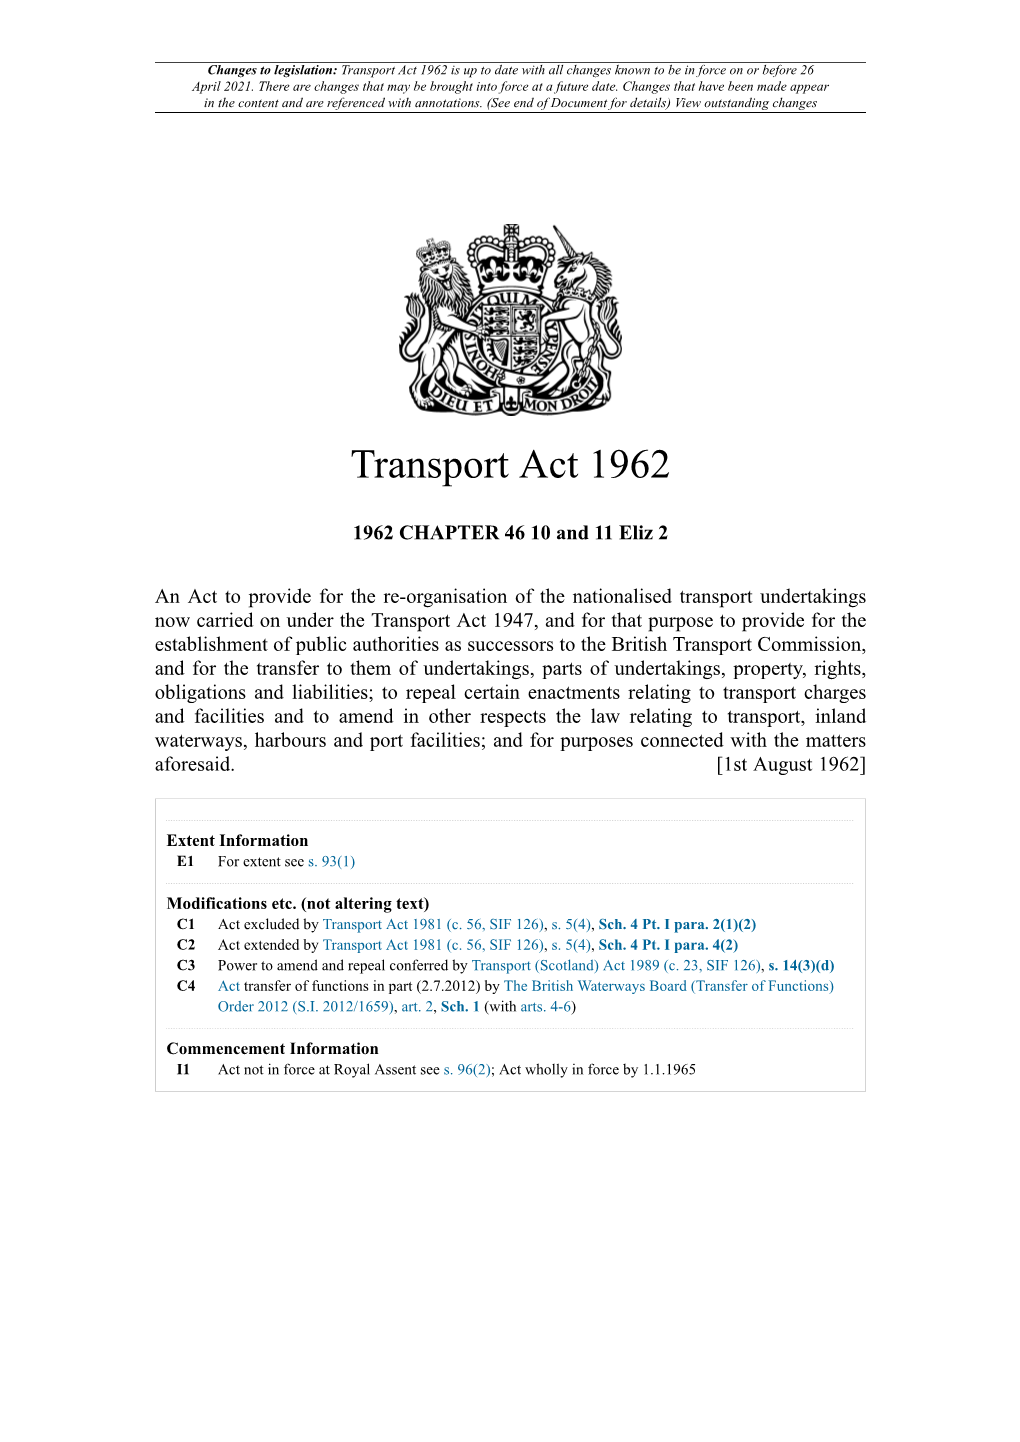 Transport Act 1962 Is up to Date with All Changes Known to Be in Force on Or Before 26 April 2021